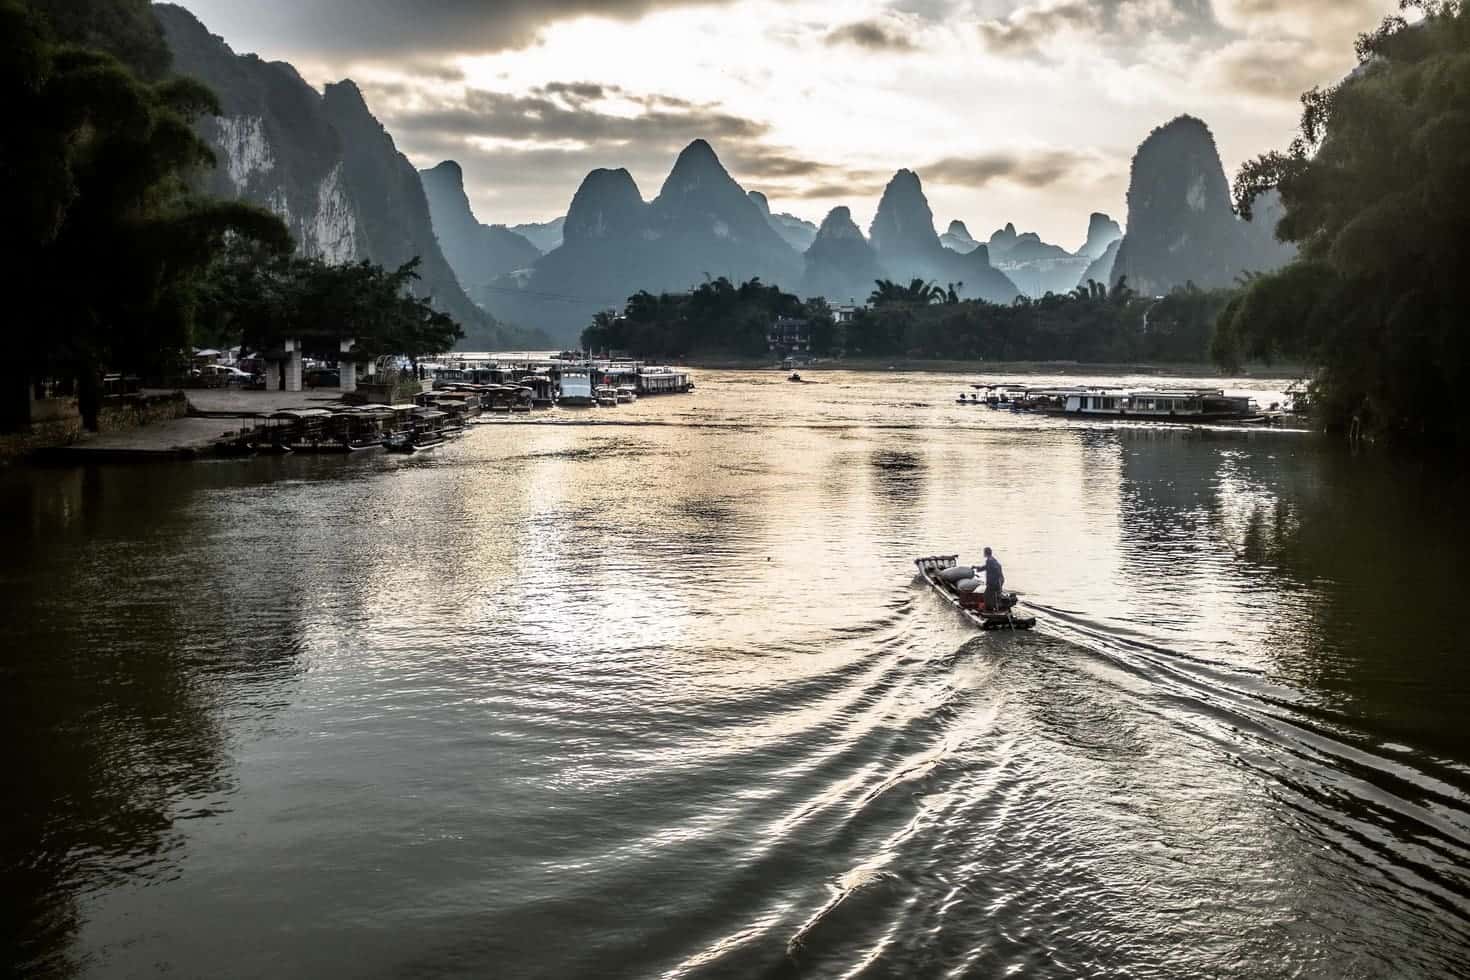 About Yangshuo China | area and tour information